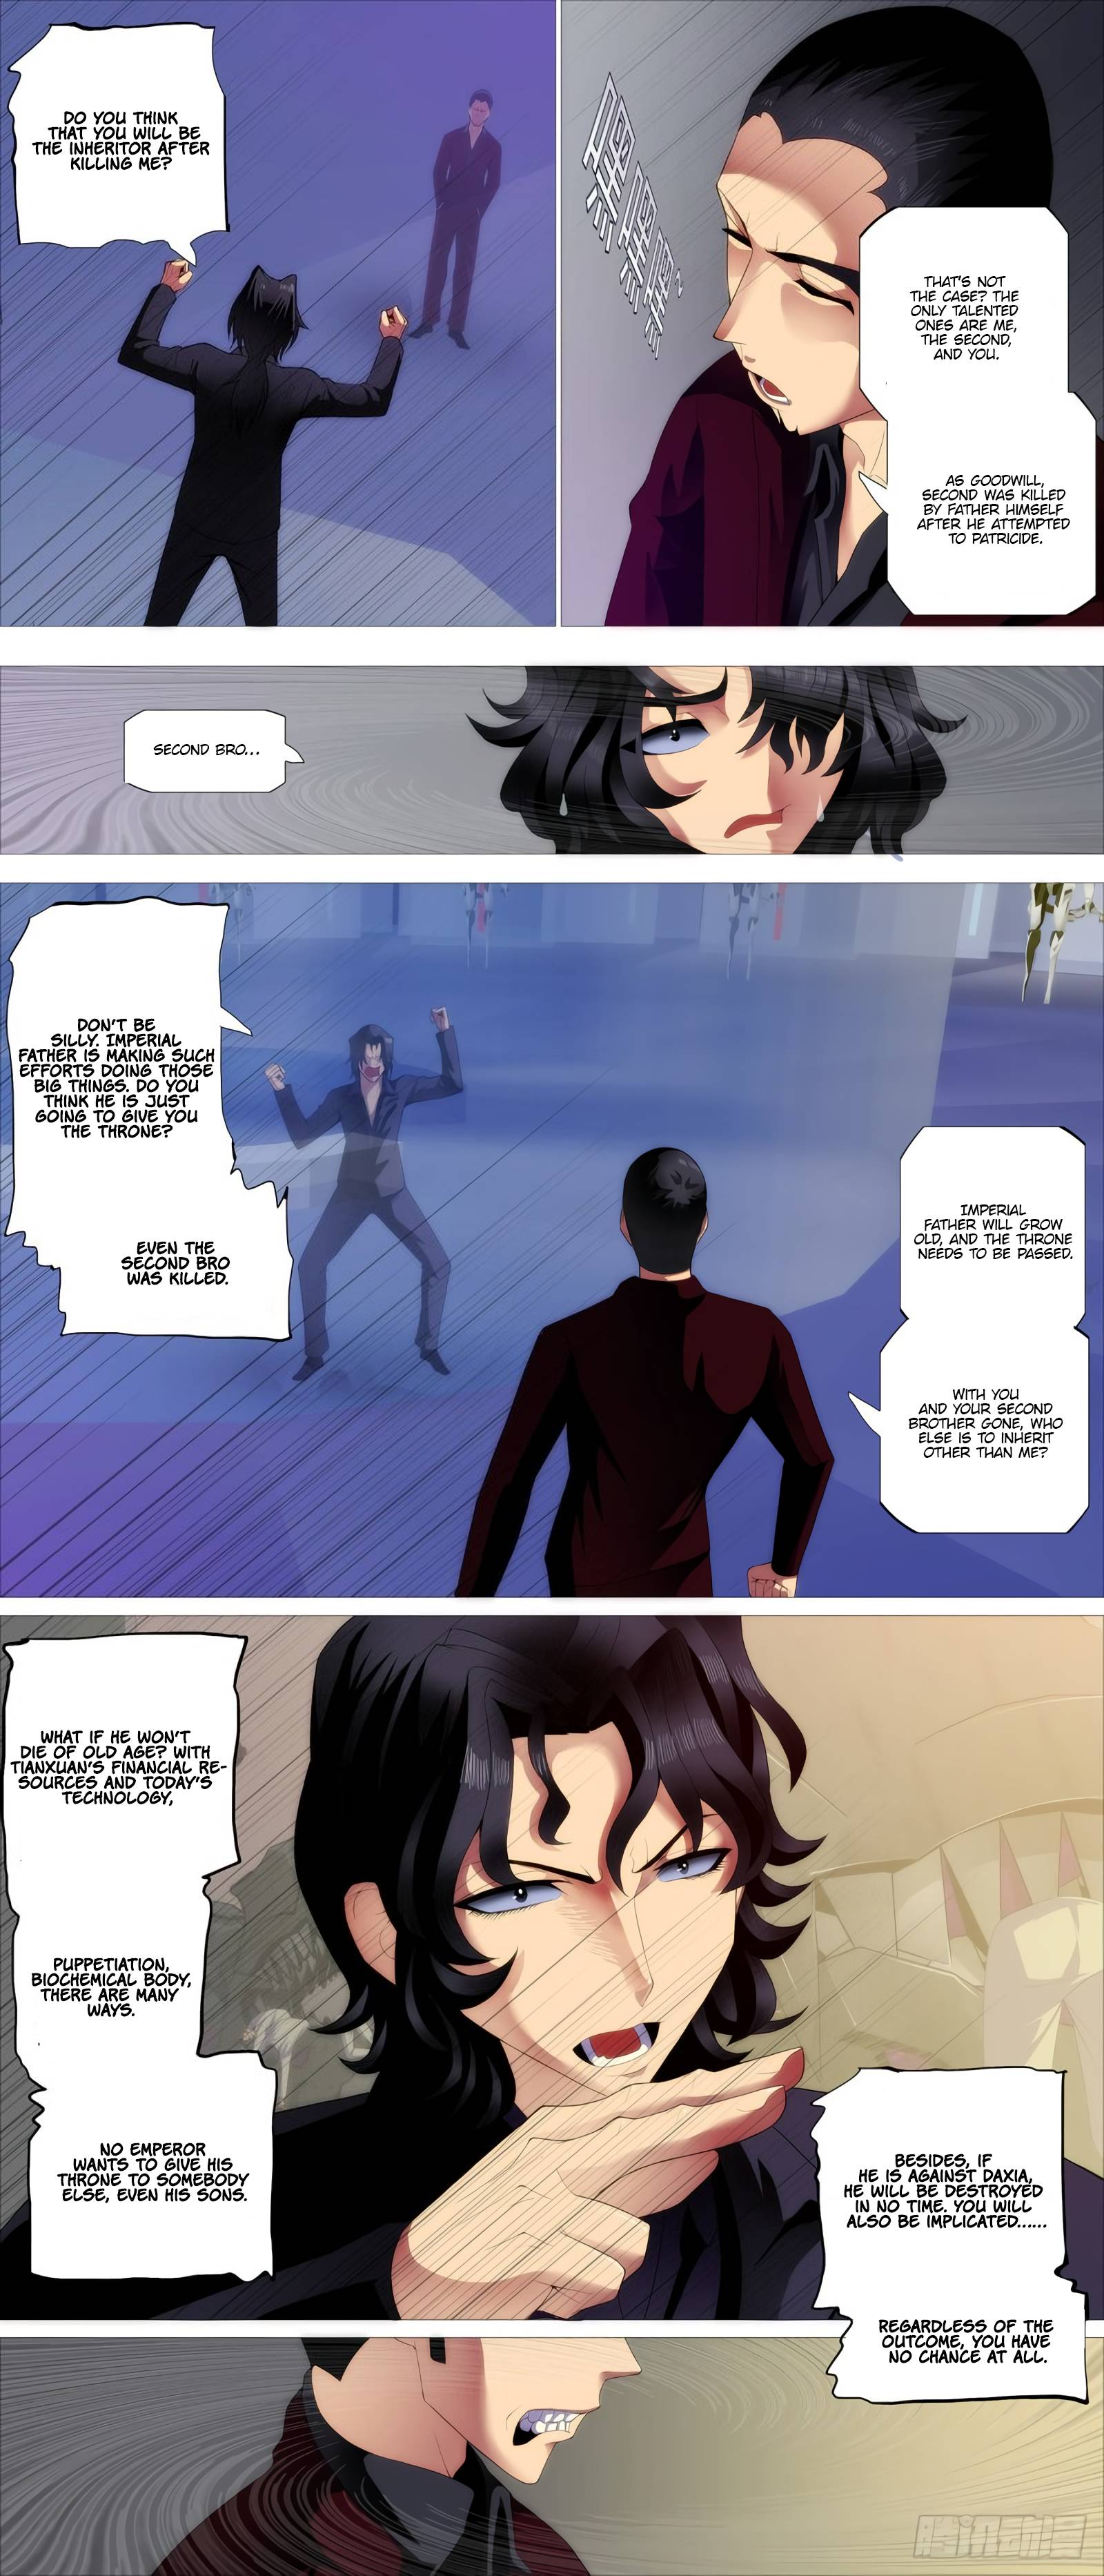 Iron Ladies chapter 428 page 4